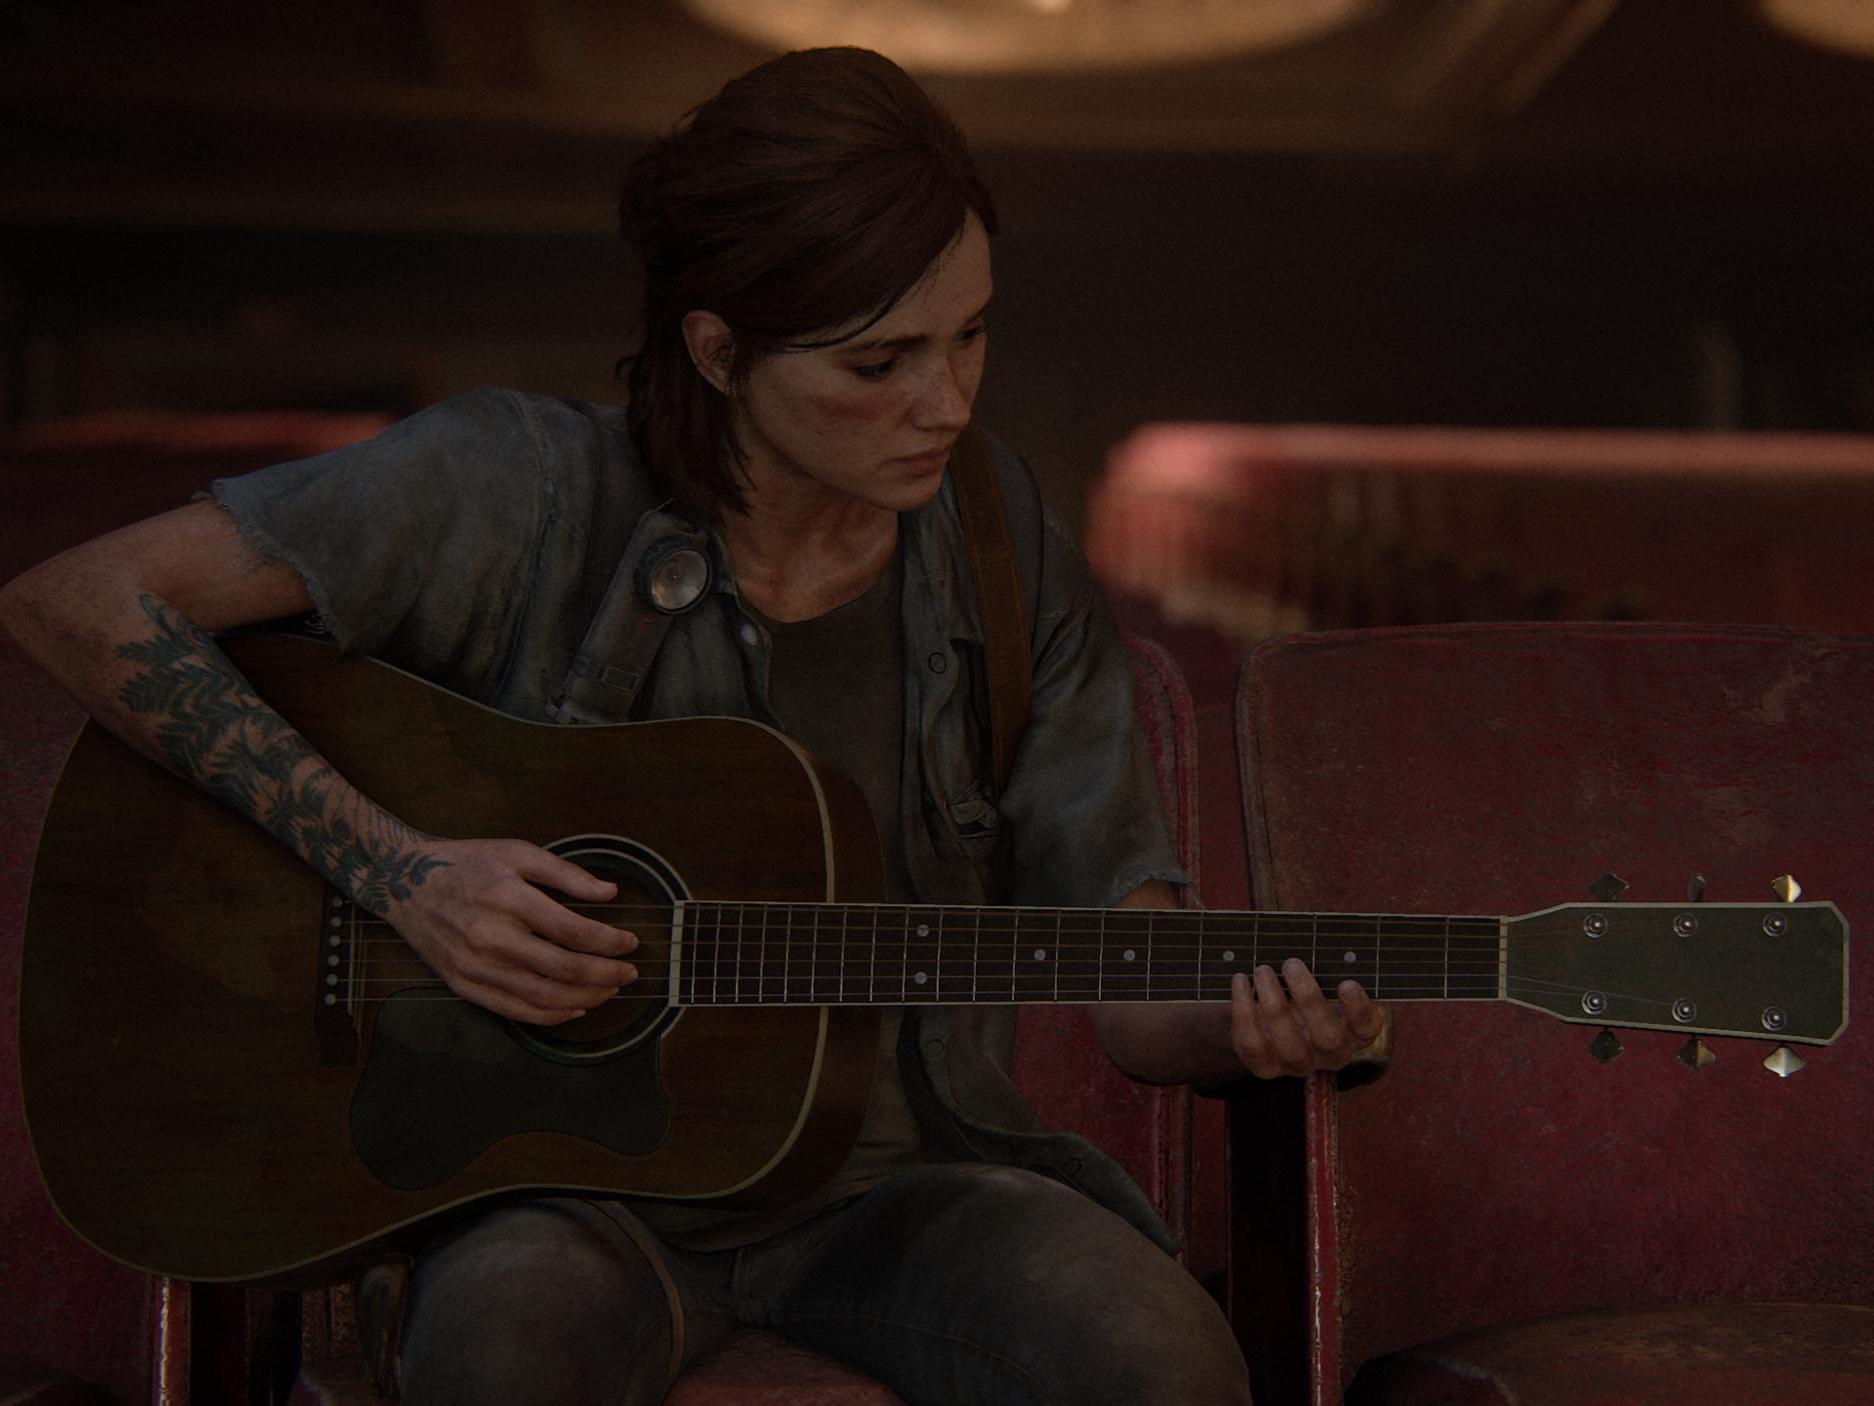 Ellie strums her guitar in a quiet scene from the masterful follow-up to 2013's 'The Last of Us'